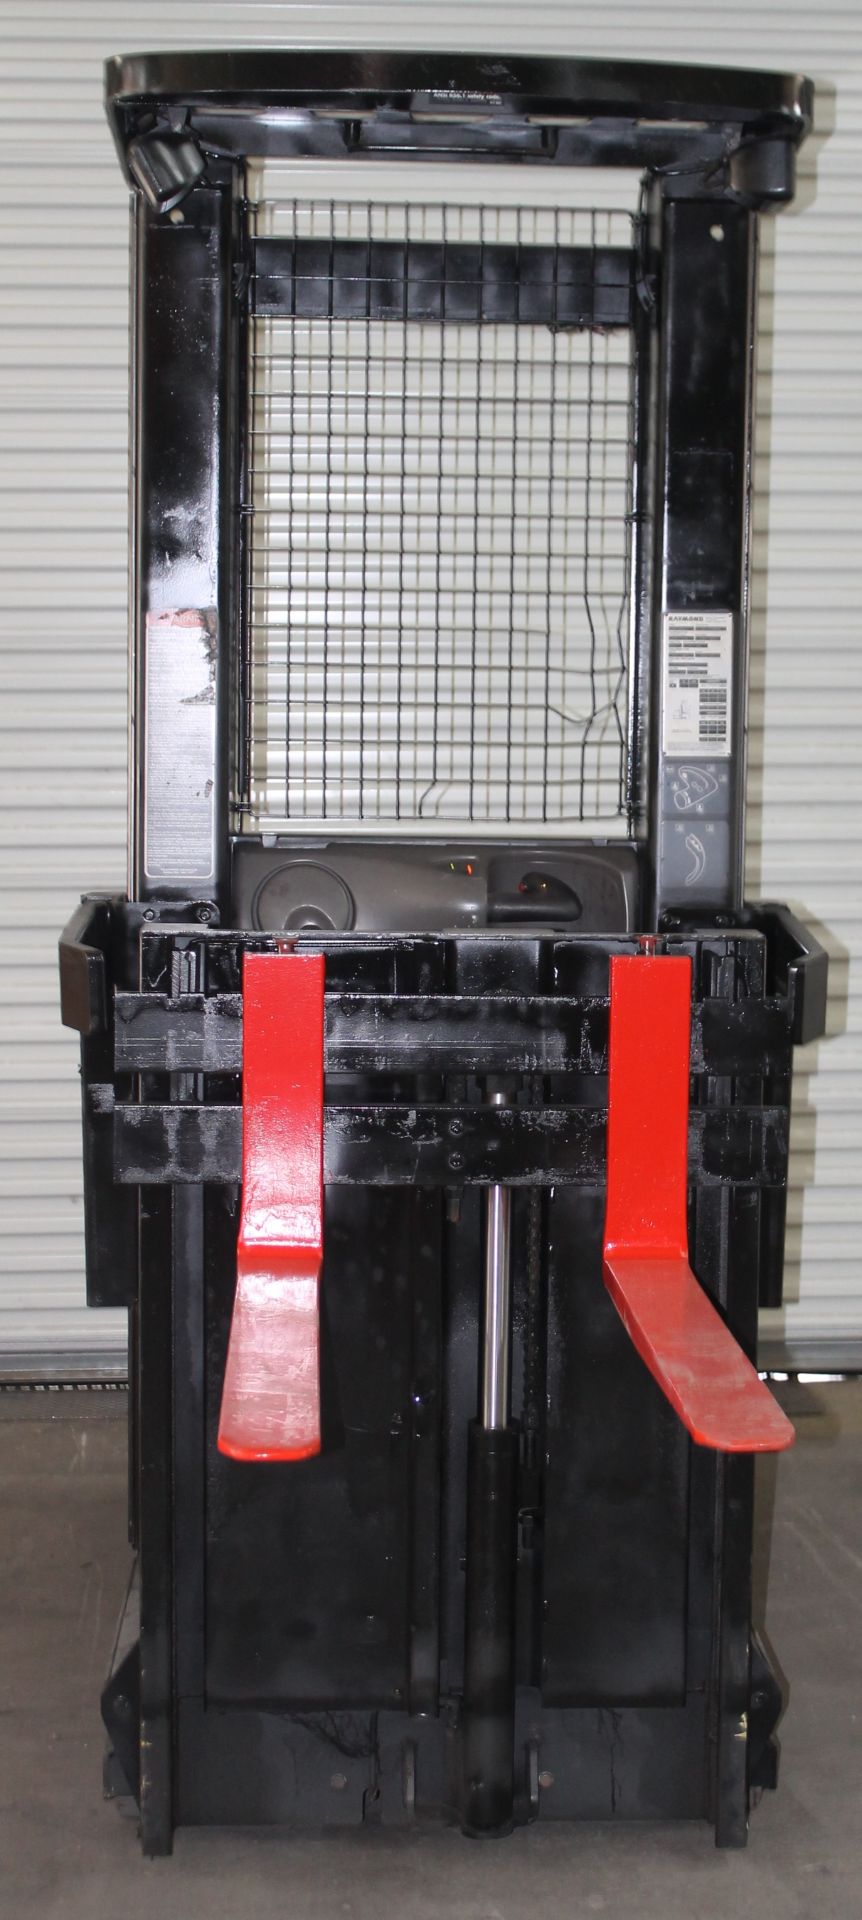 2003 RAYMOND ORDER PICKER WITH ERGO LIFT / MINI MAST FEATURE, CLICK HERE TO WATCH VIDEO - Image 4 of 8